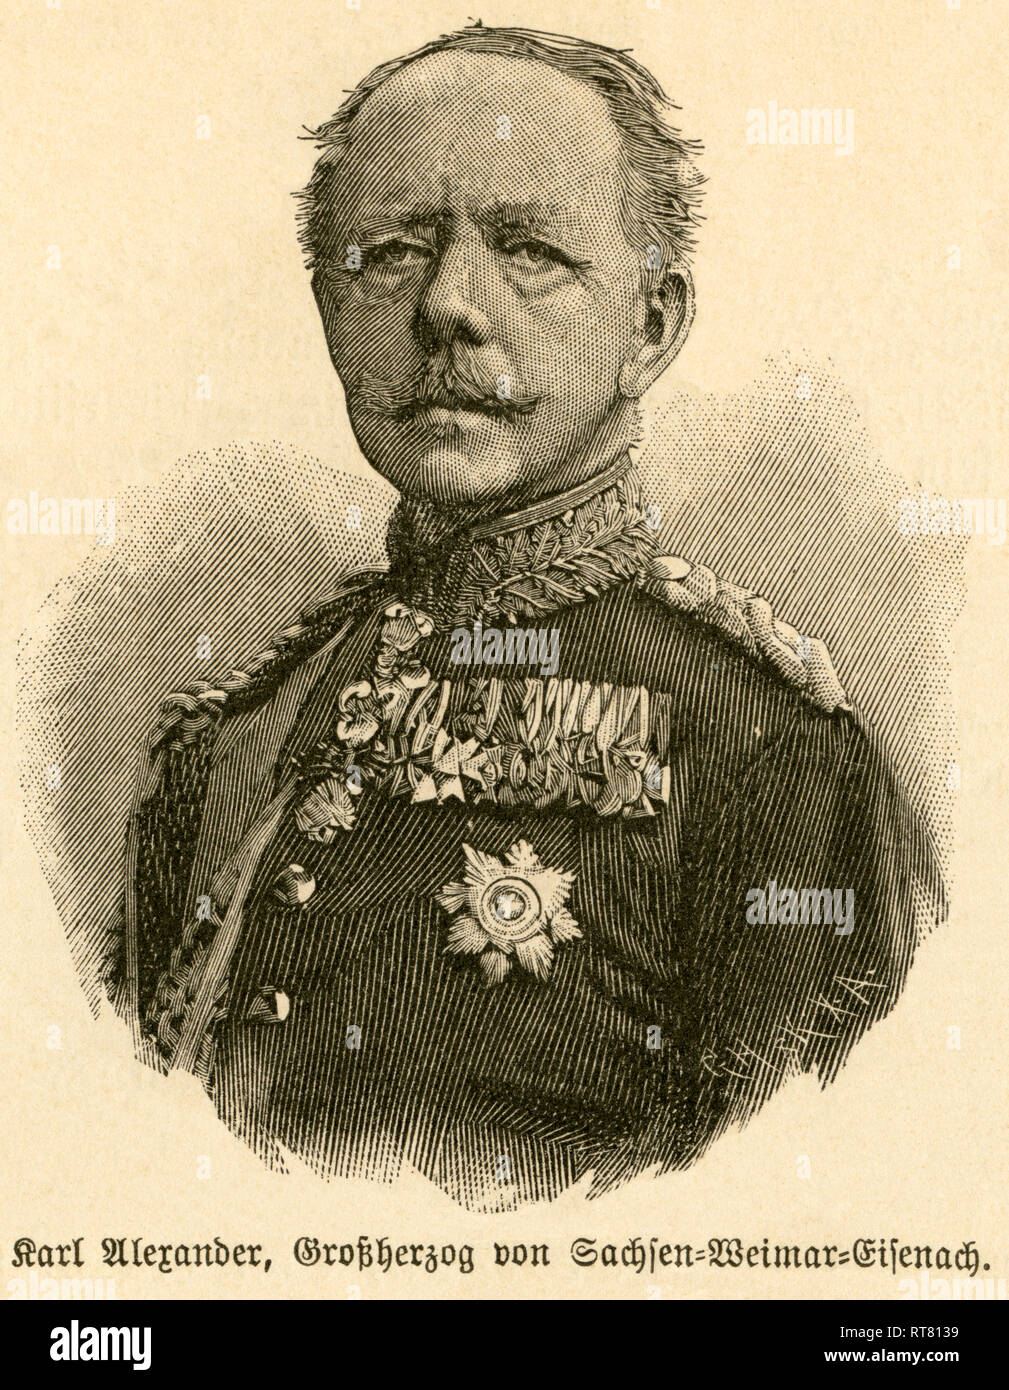 Charles Alexander, Grand Duke of Saxe-Weimar-Eisenach, portrait from: 'Deutschlands Heerführer' (German military leader), 1640-1894, portrayed by Sprößer, publishing house Ferdinand Hirt and son, Leipzig, 1895., Additional-Rights-Clearance-Info-Not-Available Stock Photo